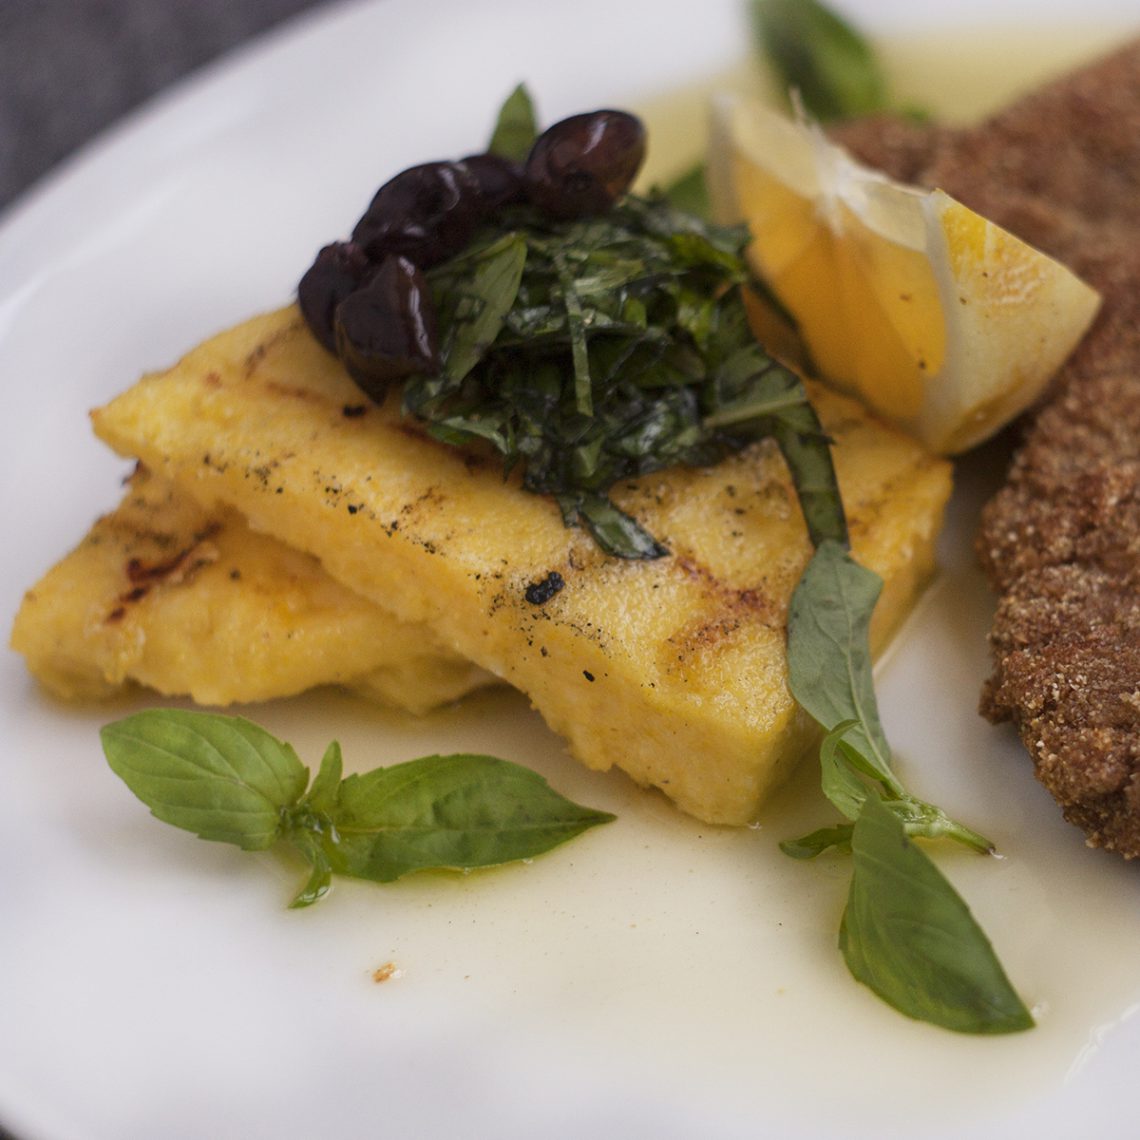 Grilled polenta. Step by step picture recipes in cooking blog.